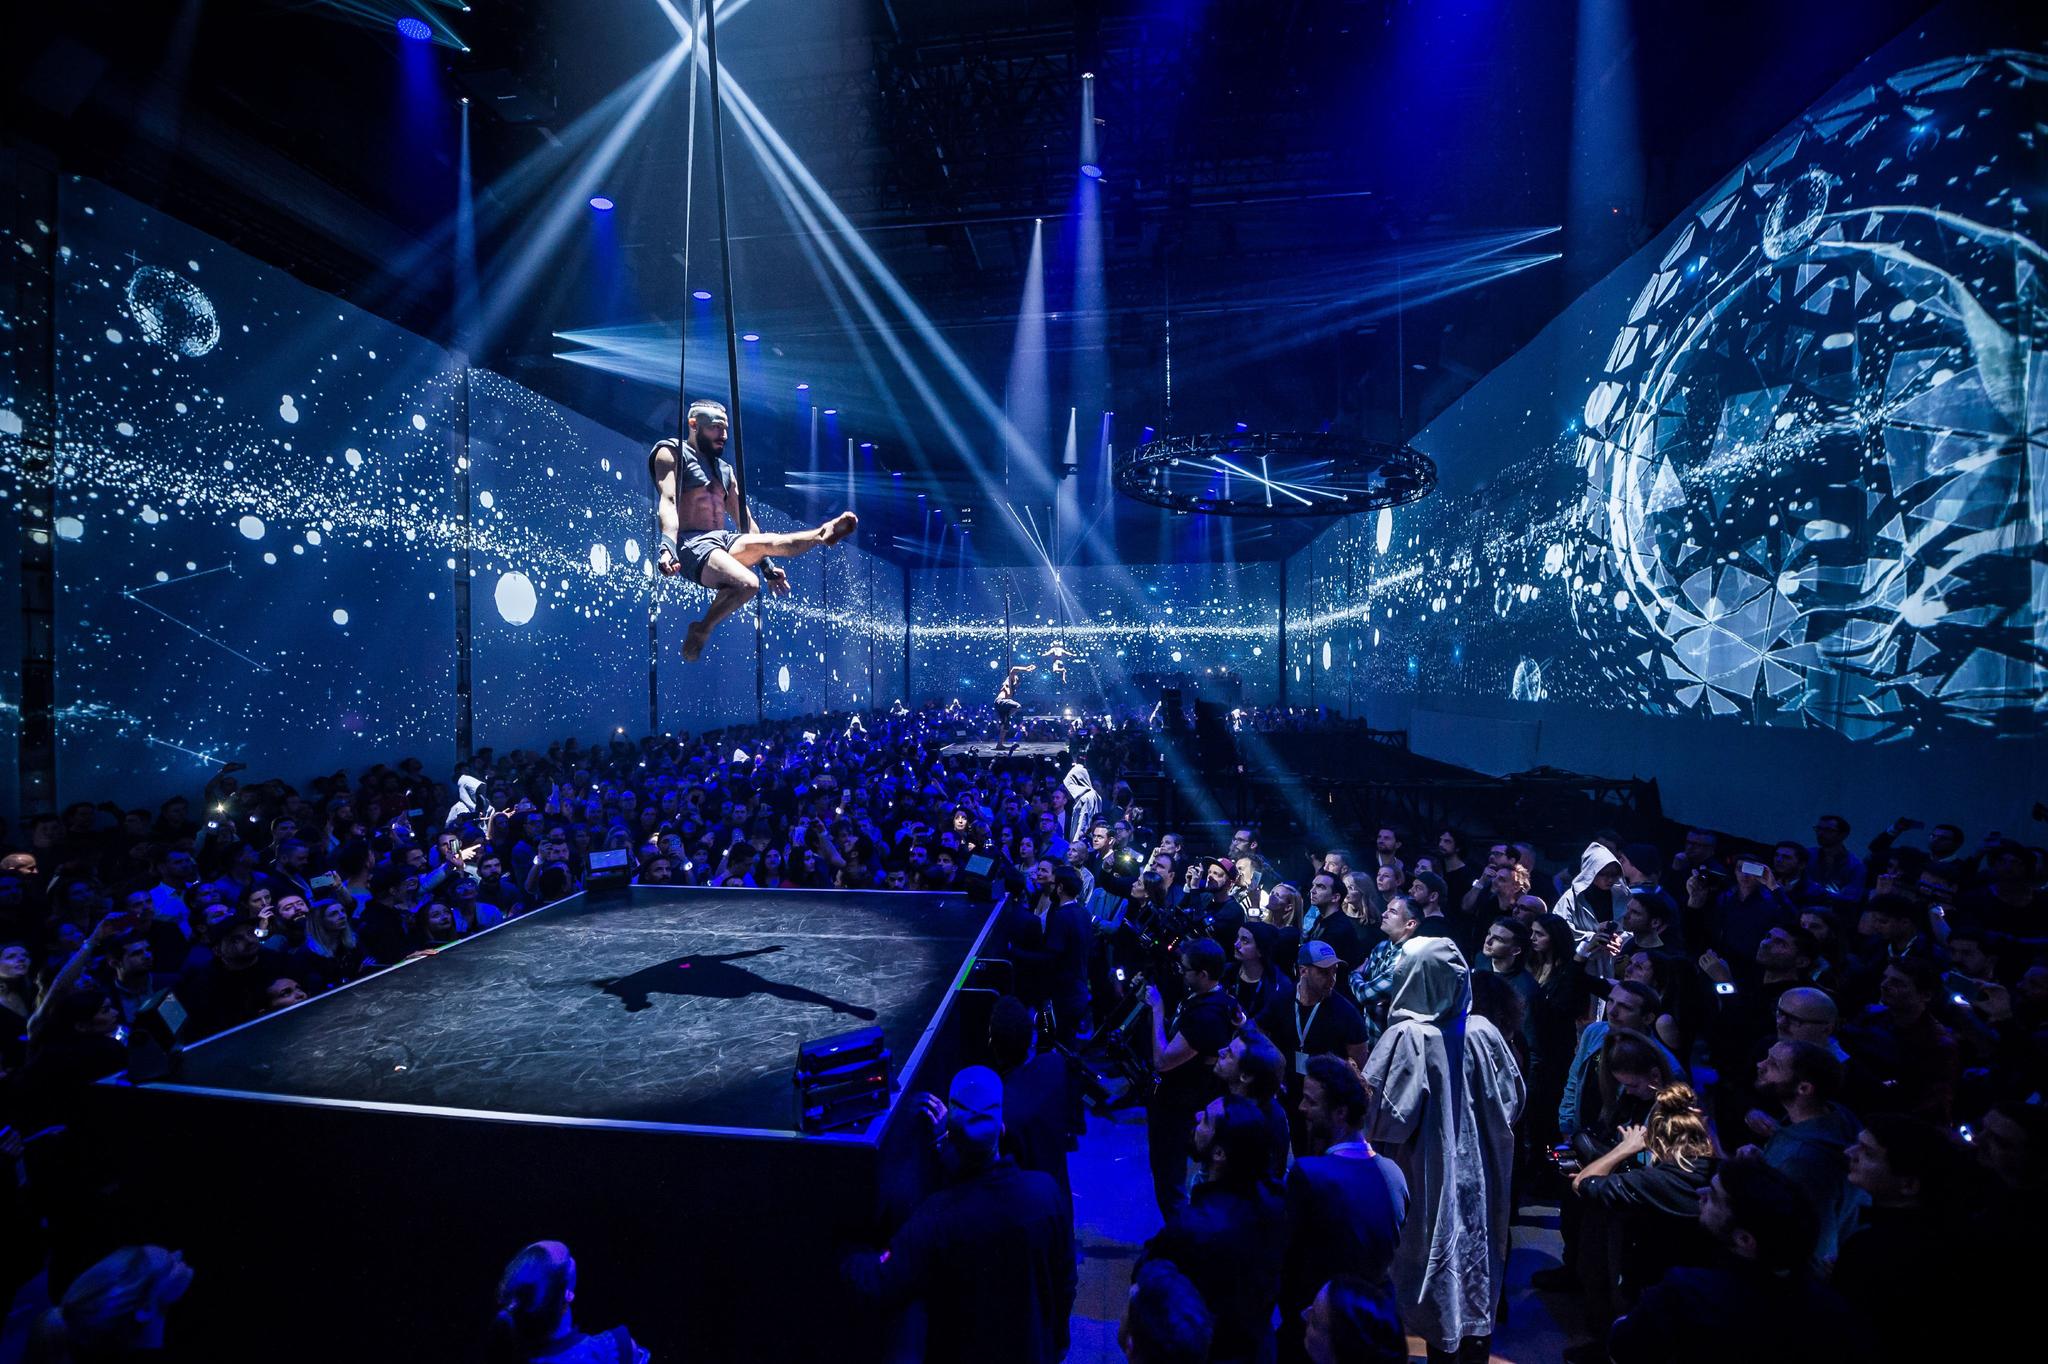 An acrobat performs flying above a crowd in a club setting. Projection mapping in blue on the walls.